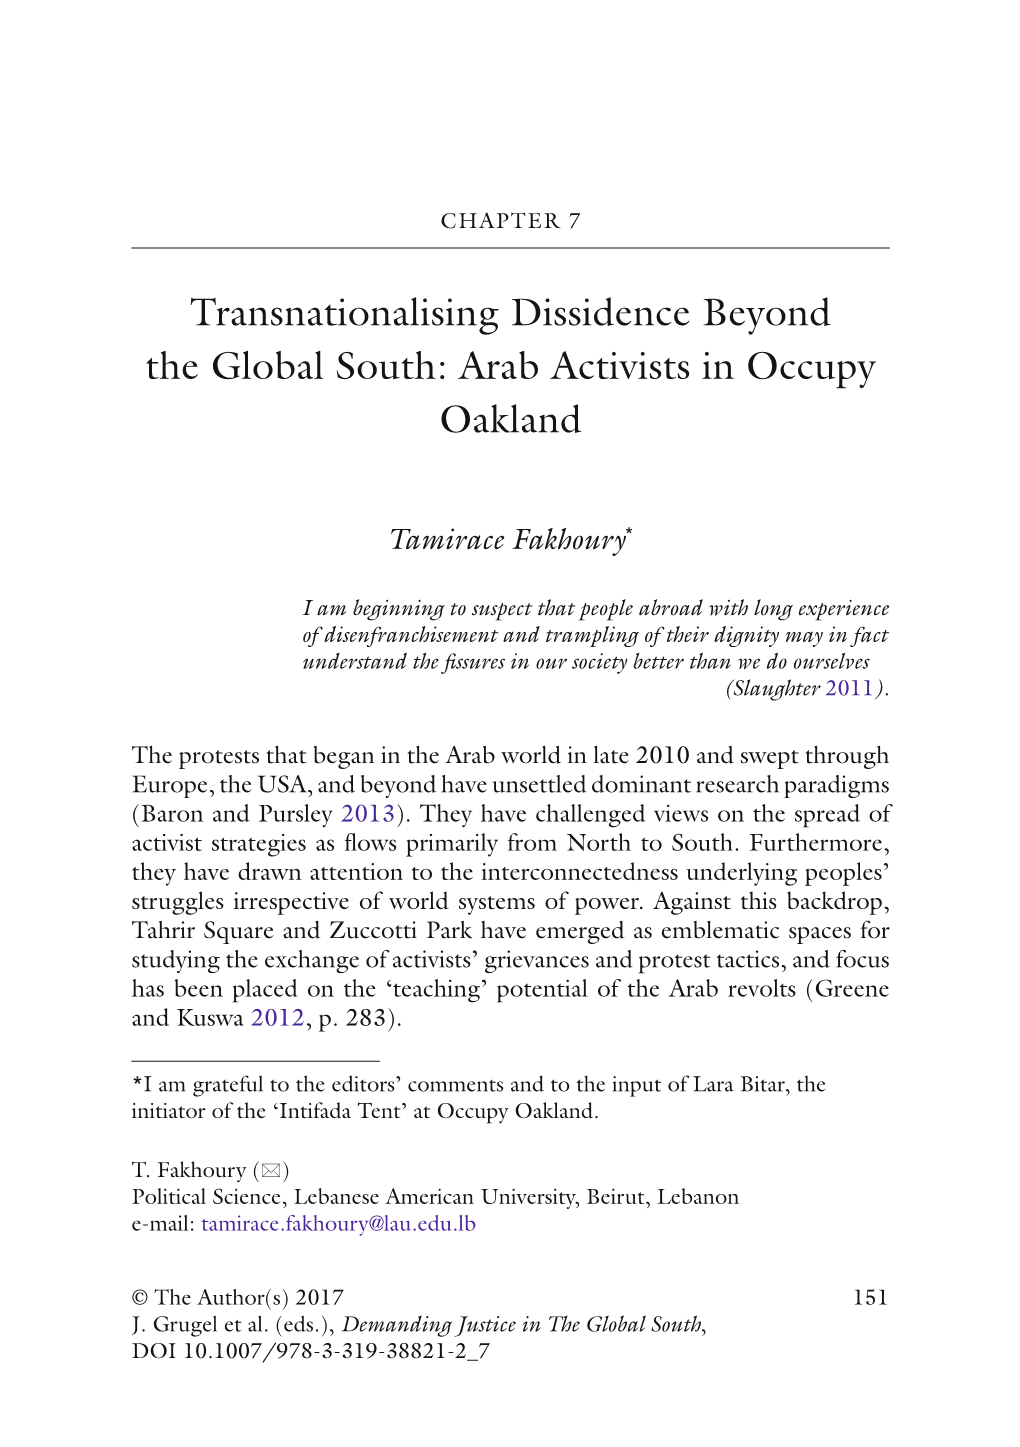 Transnationalising Dissidence Beyond the Global South: Arab Activists in Occupy Oakland